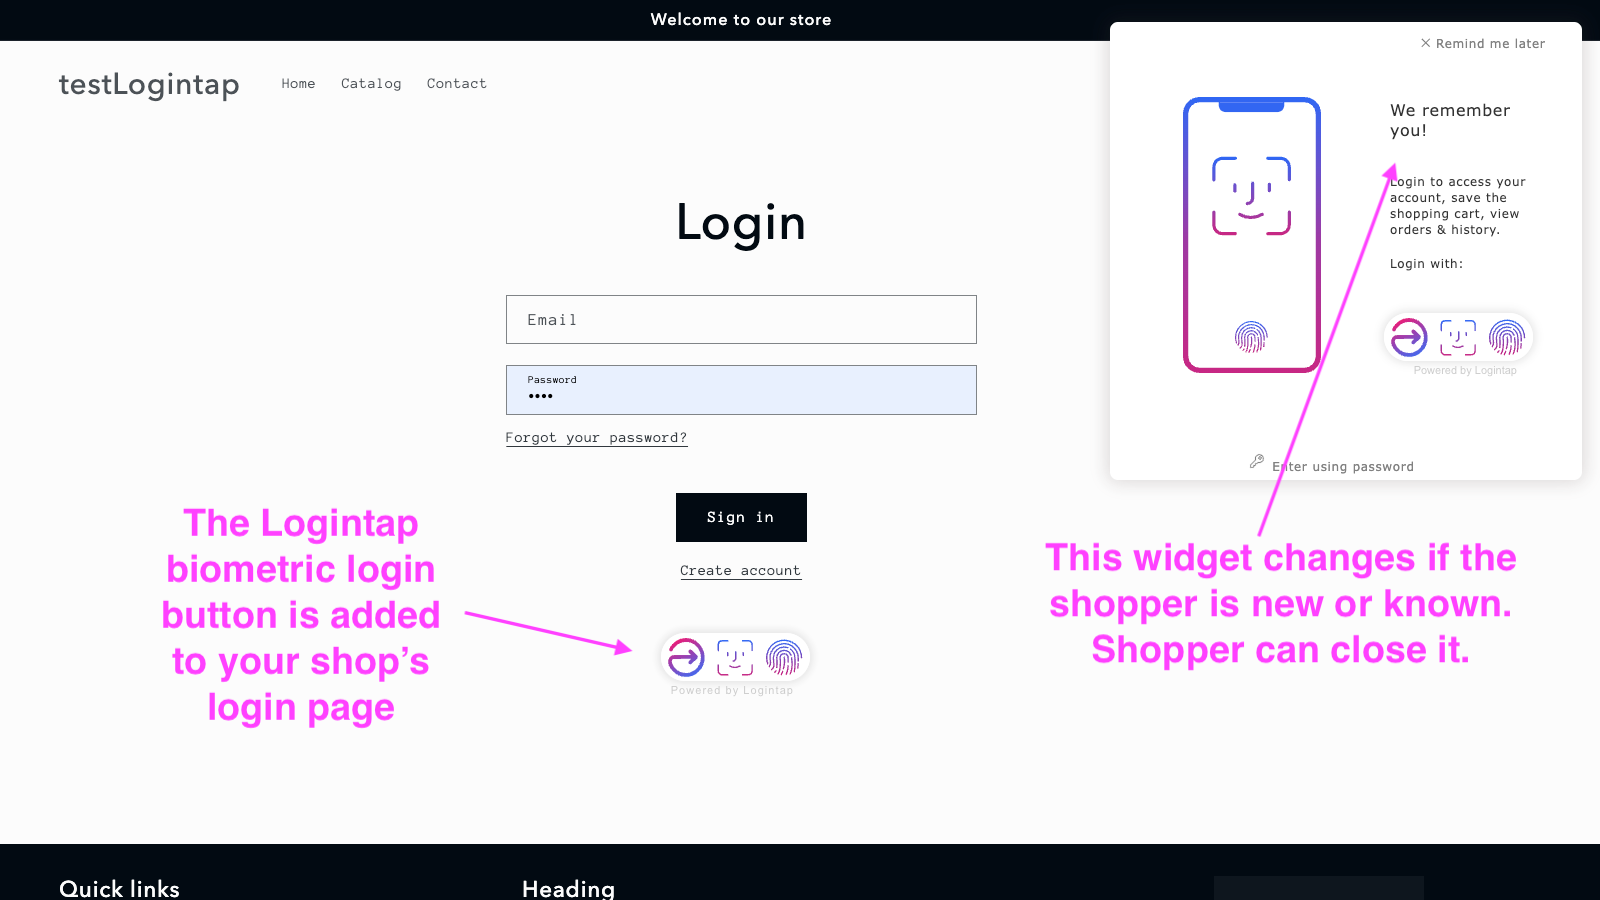 A login page of your shop is added with biometric buttons